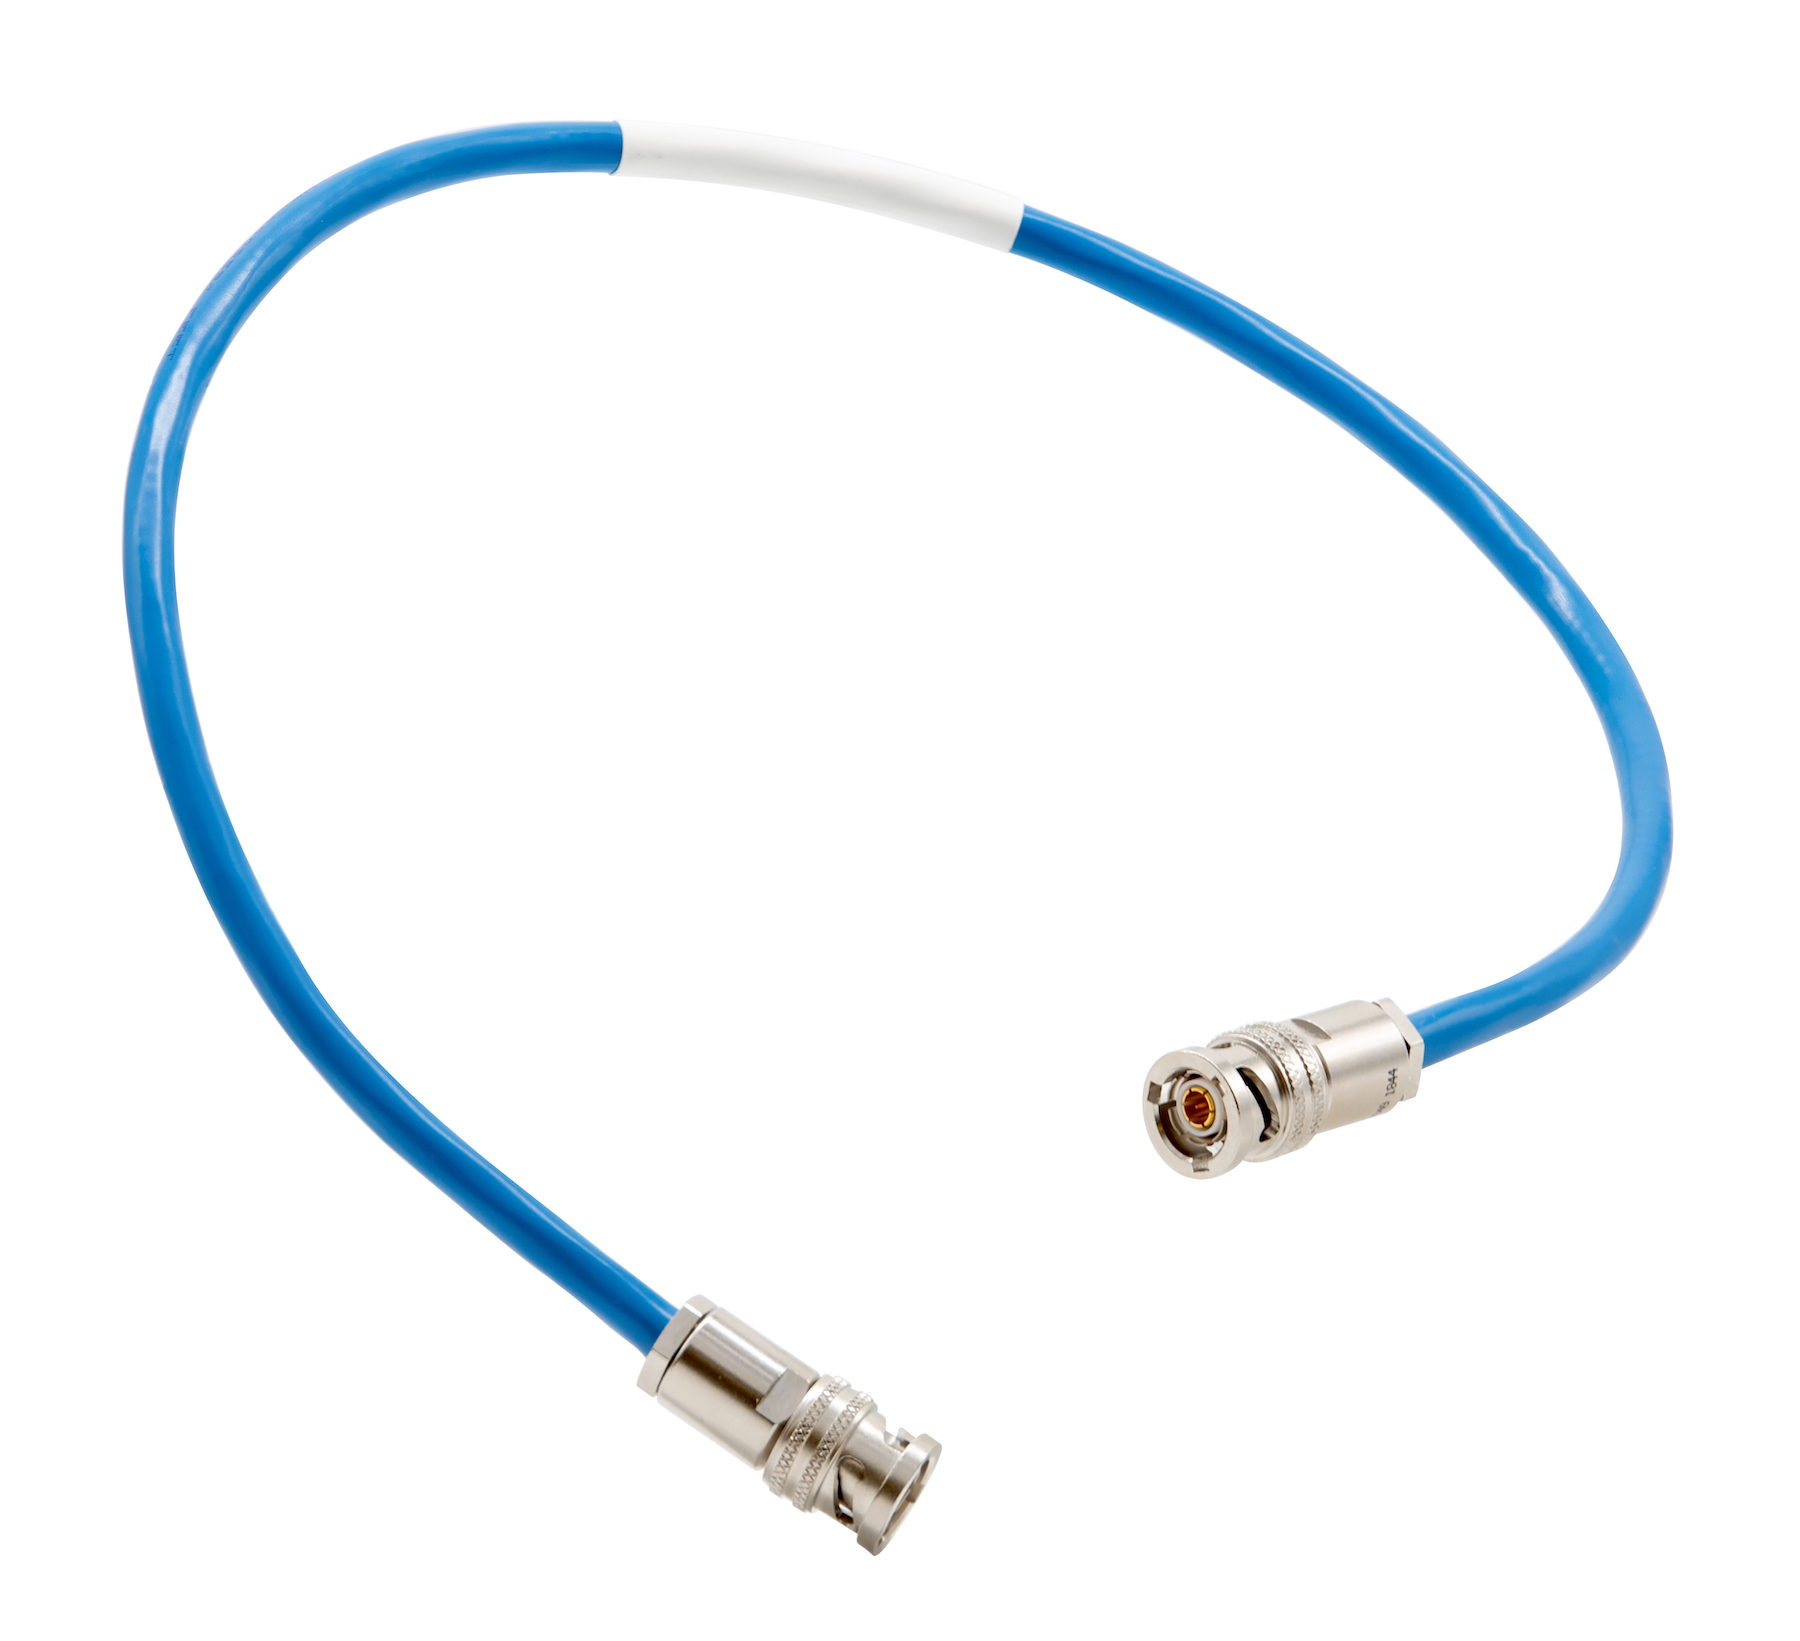 Cinch Connectivity Solutions' new MIL-STD-1553B cable assemblies